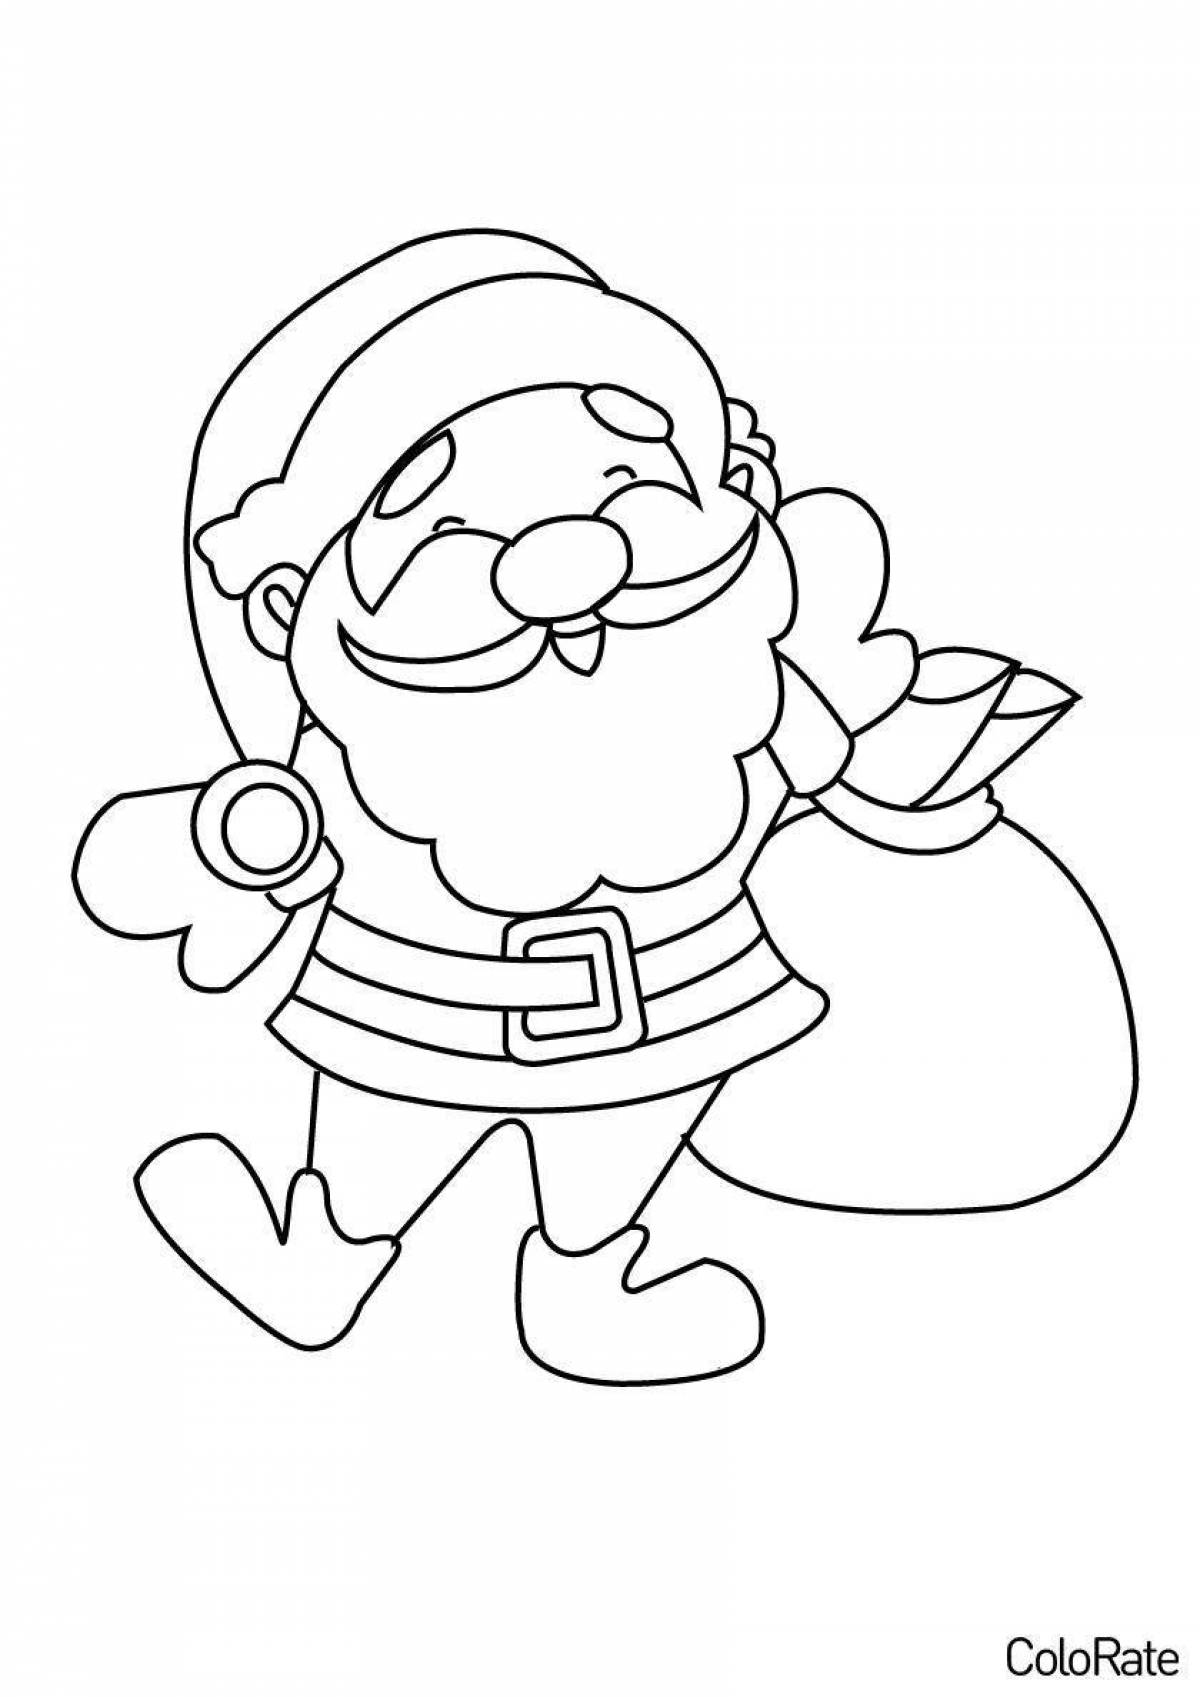 Animated coloring santa claus for kids